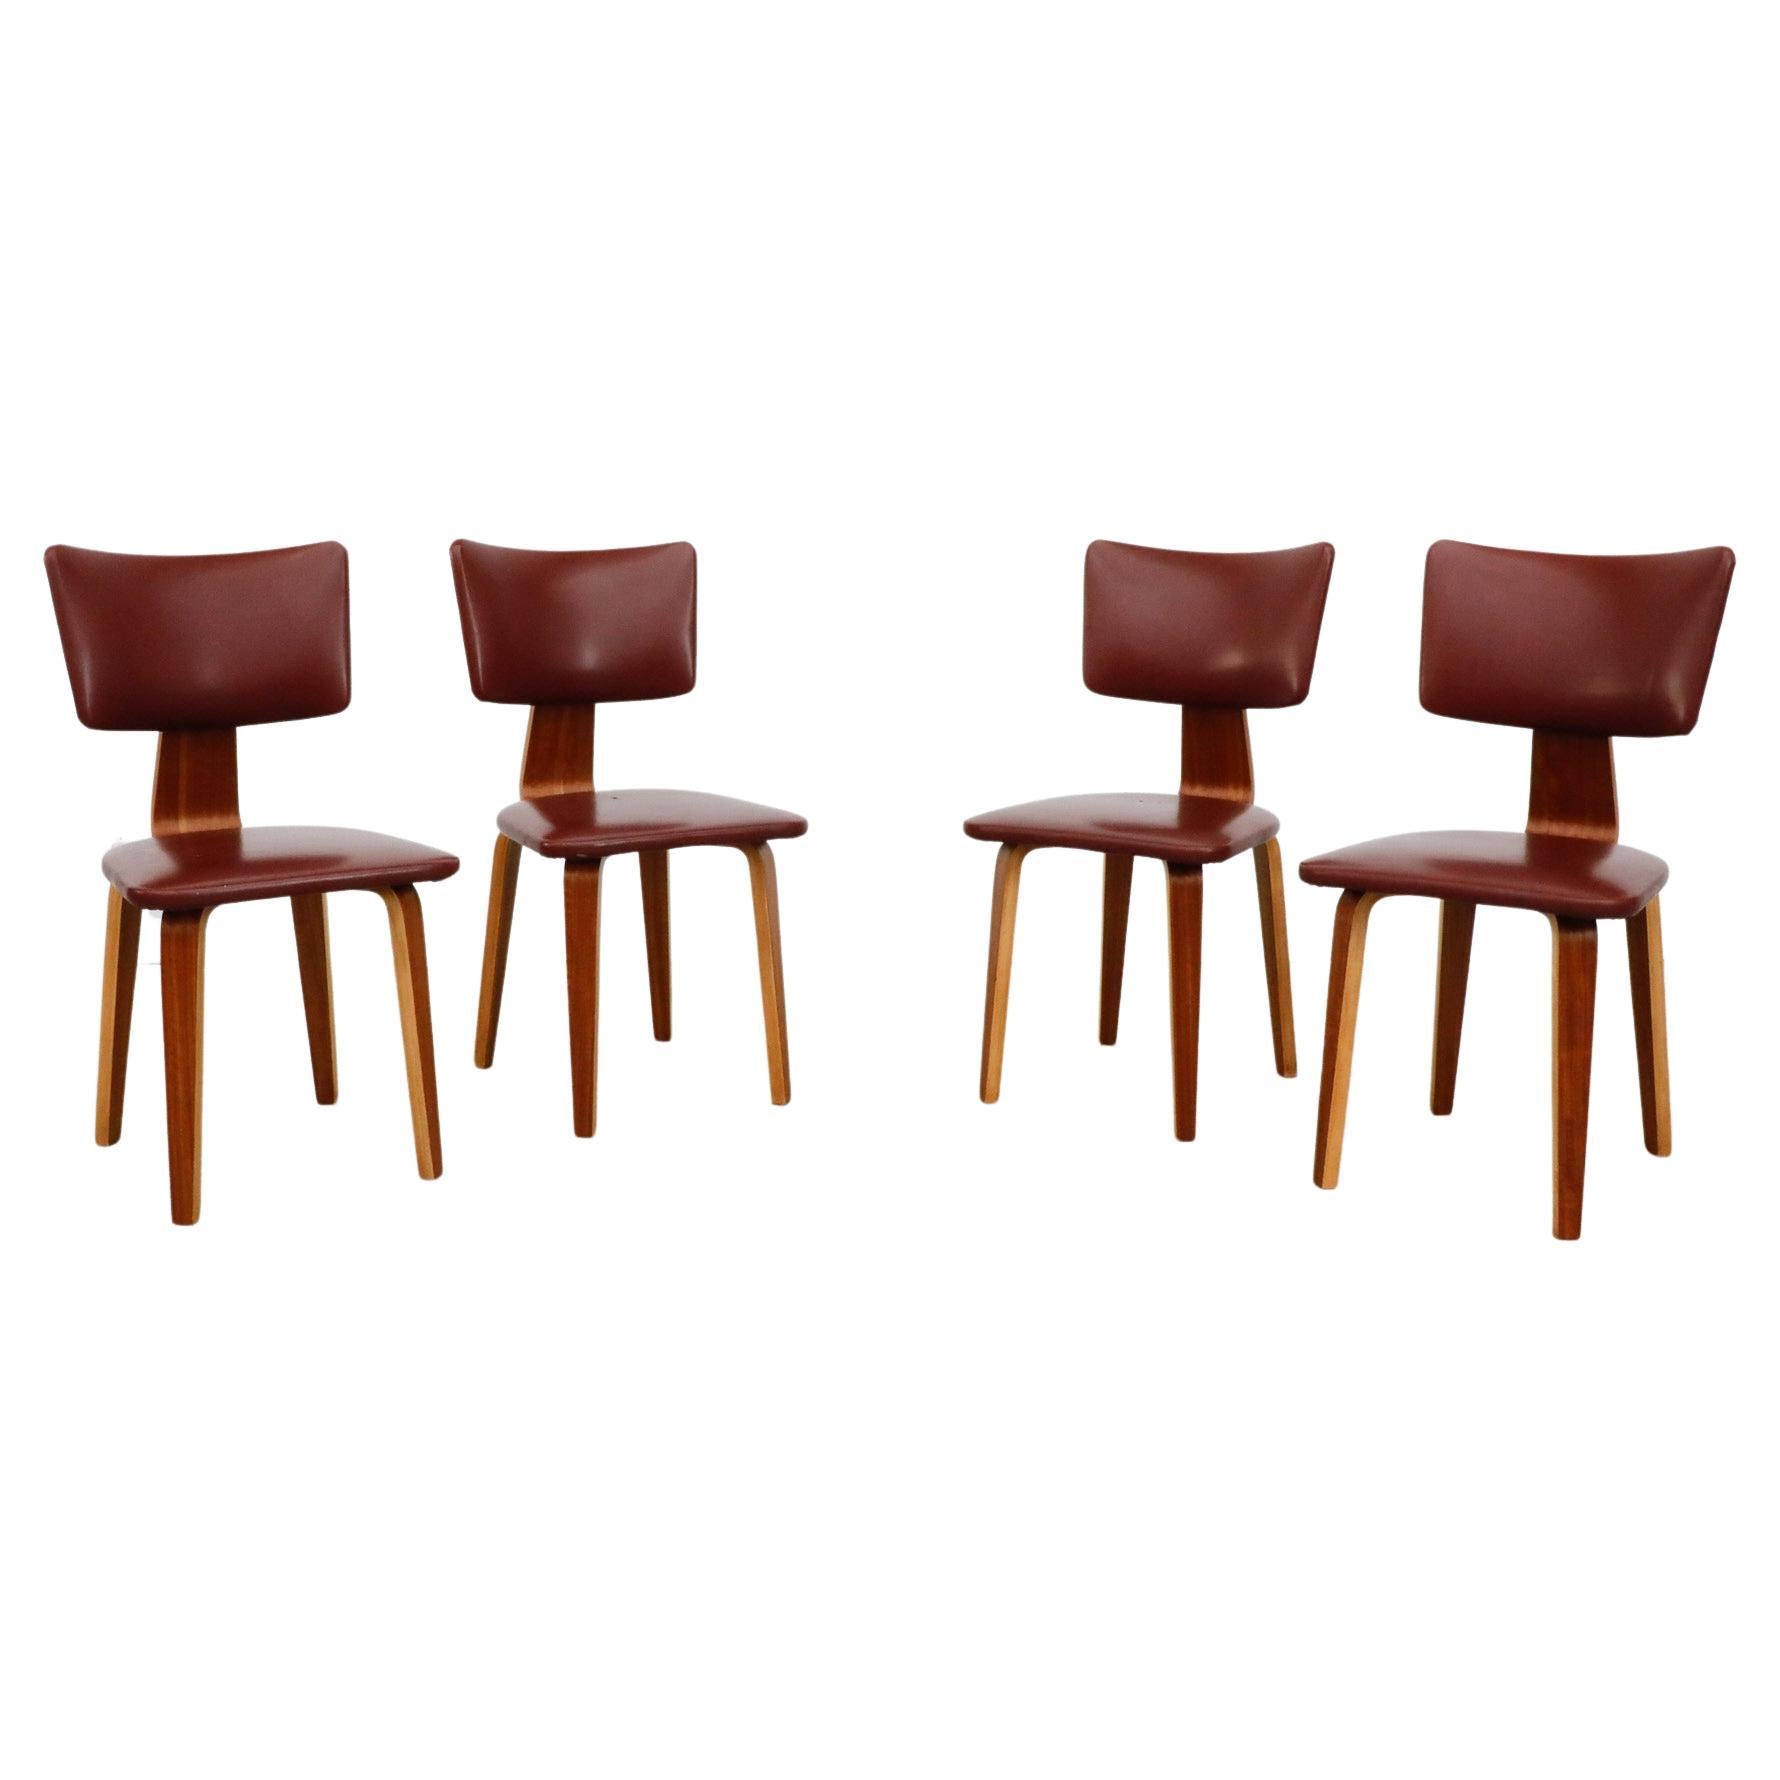 Set of 4 Cor Alons Teak and Burgundy Skai Dining Chairs For Sale